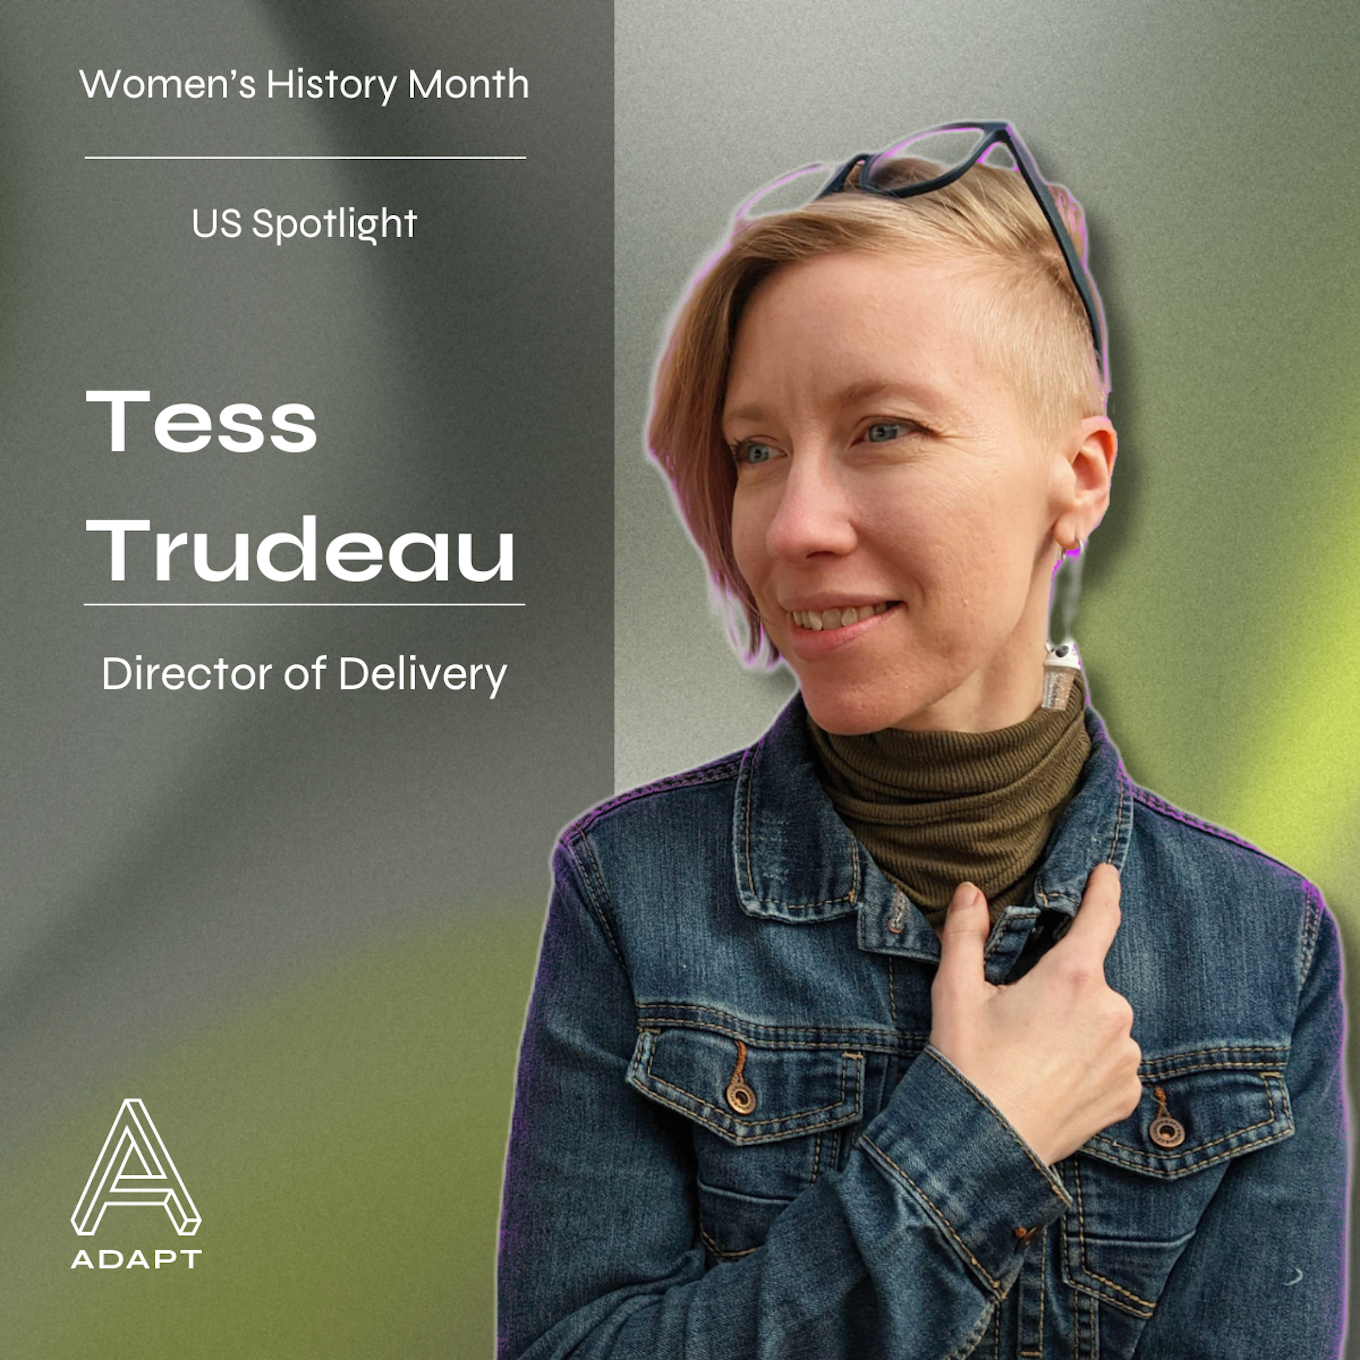 Tess Trudeau, Director of Delivery